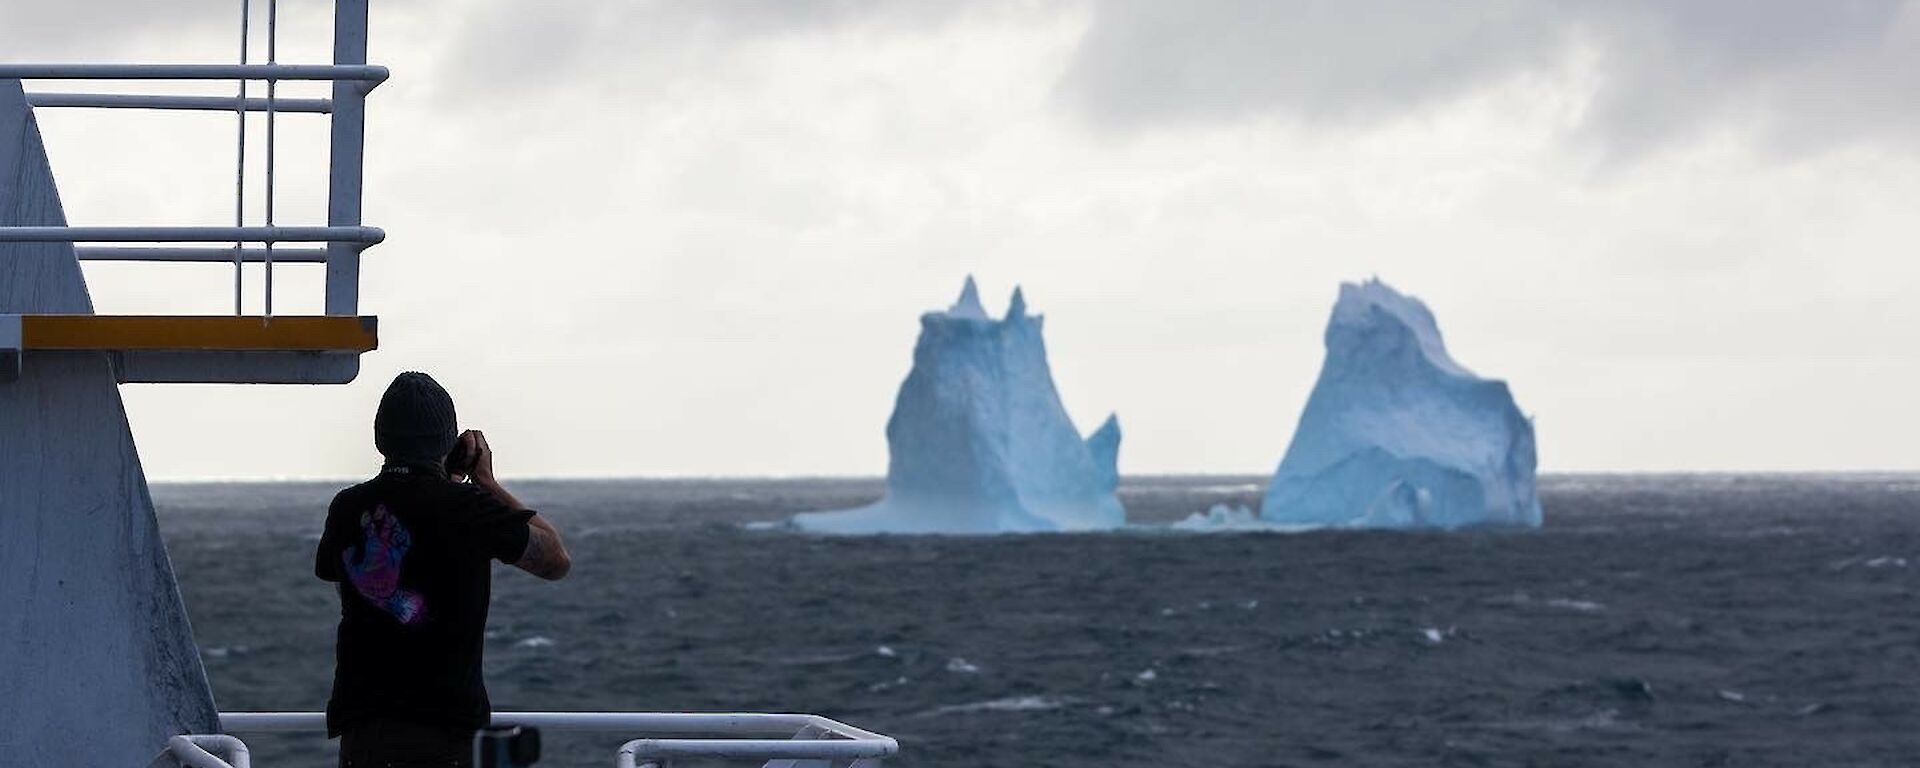 Two icebergs sit in a dark sea as a photographer stands on the front of the ship taking photos